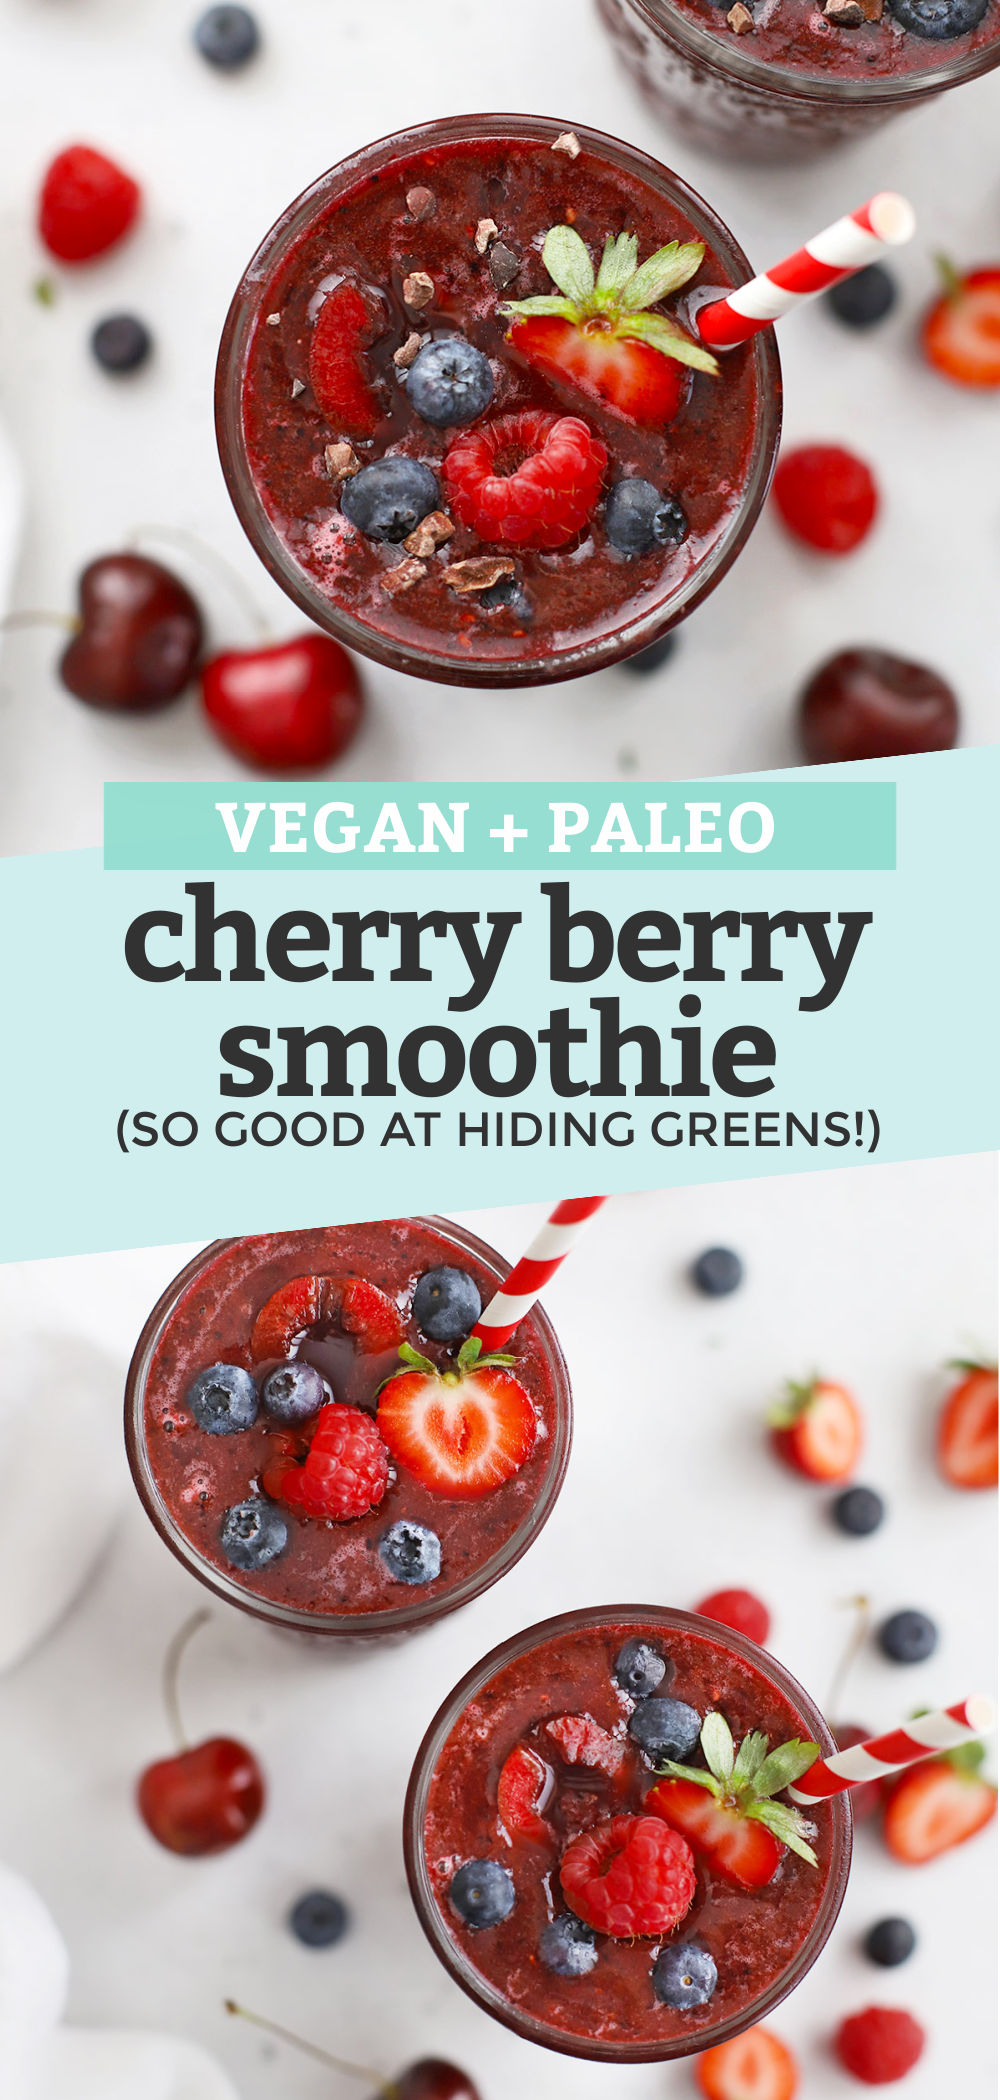 Collage of images of cherry berry smoothie topped with berries and cacao nibs with text overlay that reads "Vegan + Paleo Cherry Berry Smoothie (So Good at Hiding Greens!)"